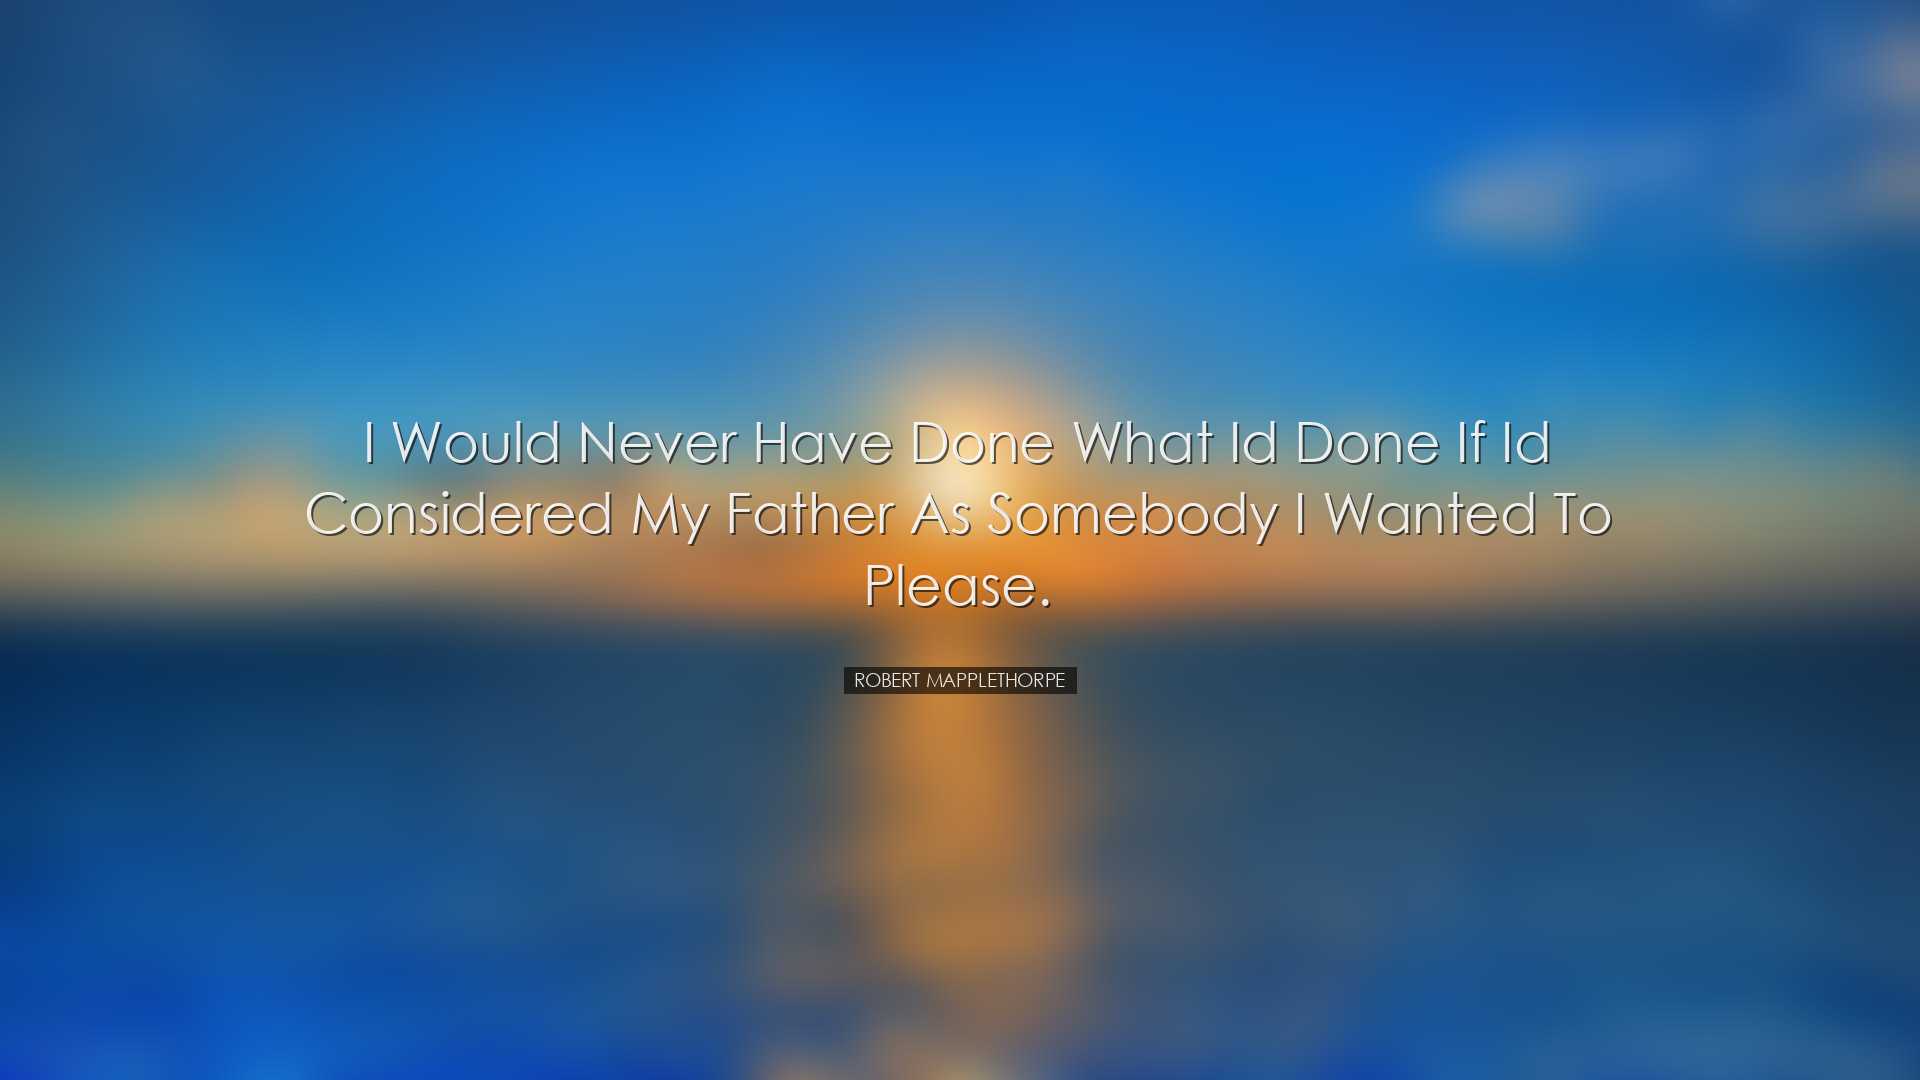 I would never have done what Id done if Id considered my father as